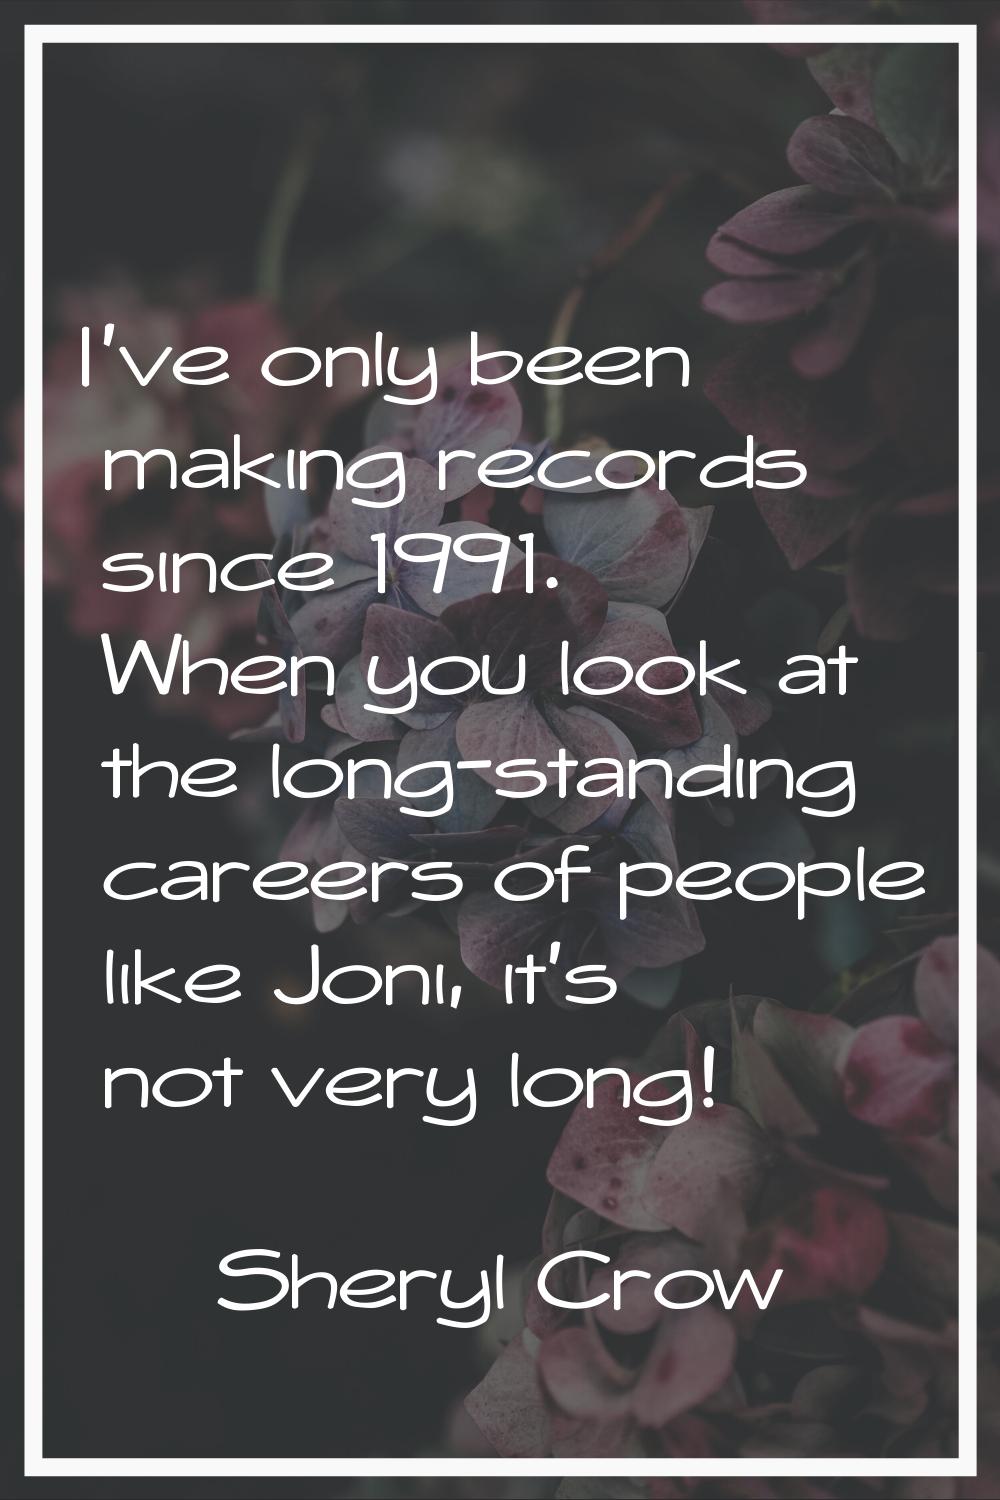 I've only been making records since 1991. When you look at the long-standing careers of people like